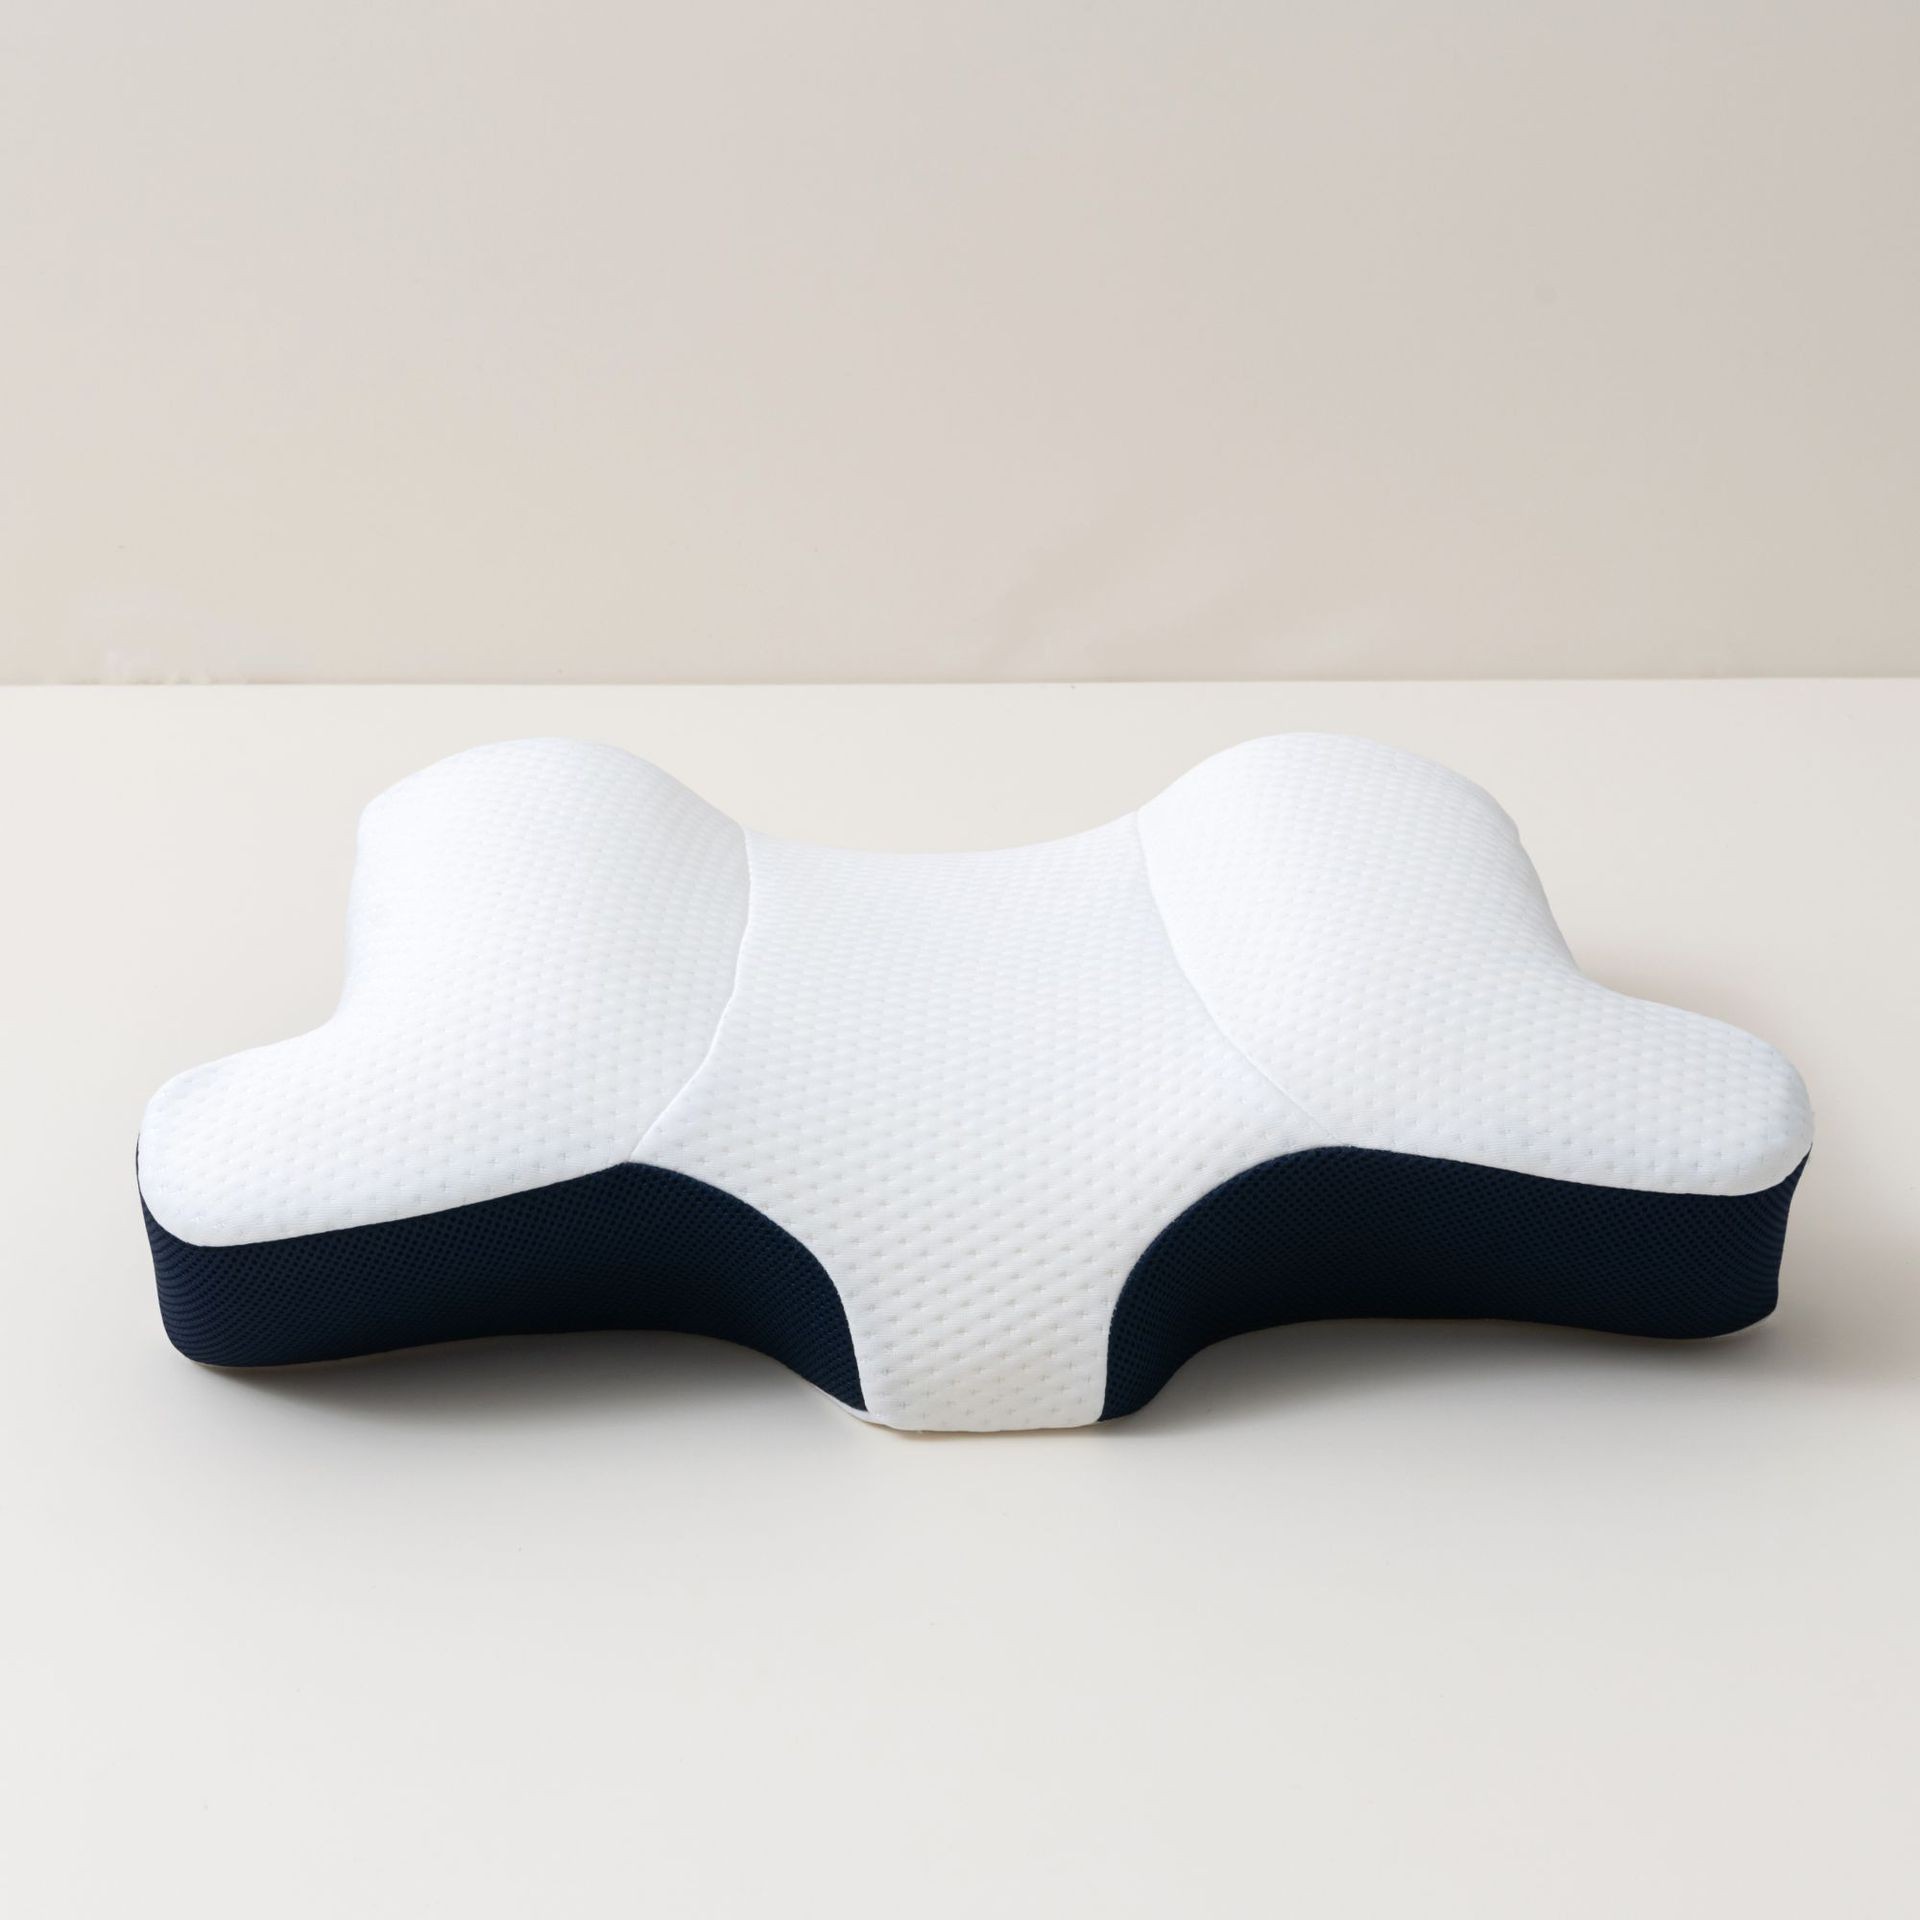 Cross-Border Supply Anti-Side Sleep Positioning Pillow Air Layer Knitted Memory Foam Slow Rebound Pillow Sleep Pillow Cervical Pillow